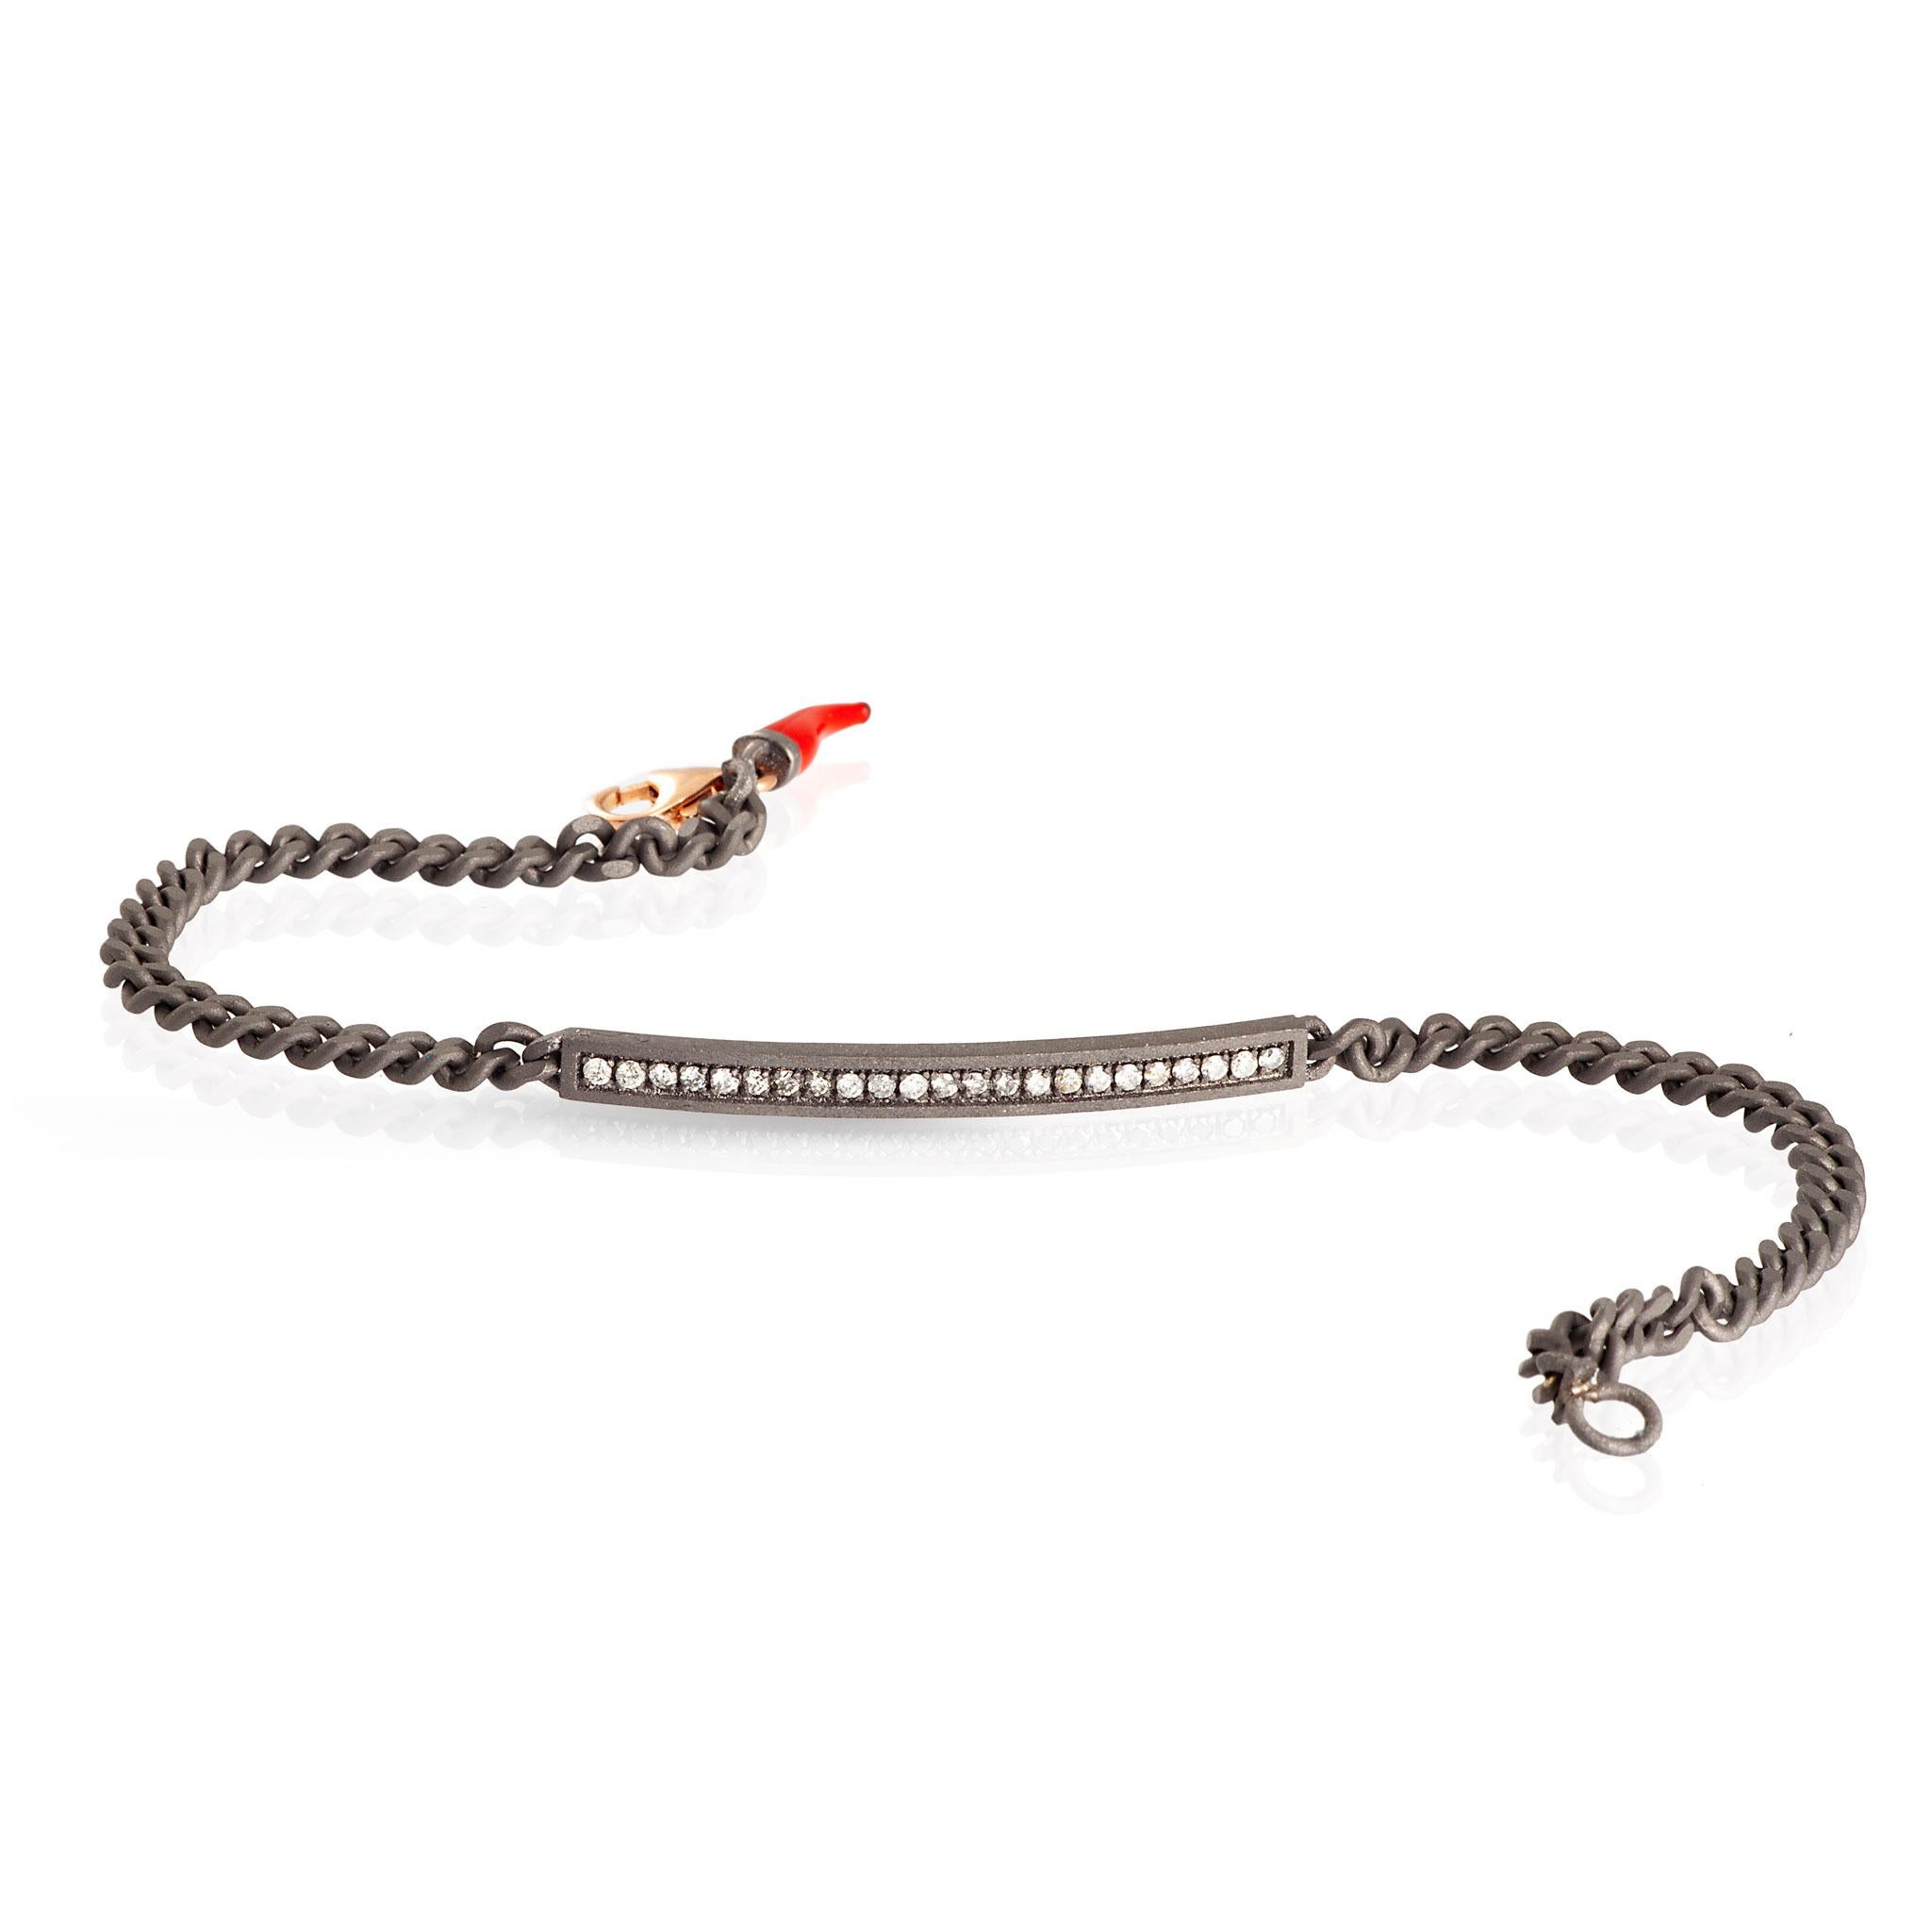 Men's bracelet in titanium, black diamonds and 9 kt red gold clasp. A titanium bar, on which 23 white diamonds with a total carat of 1 point are set, is the main element of the bracelet. On either side of the slightly curved bar is an elegant